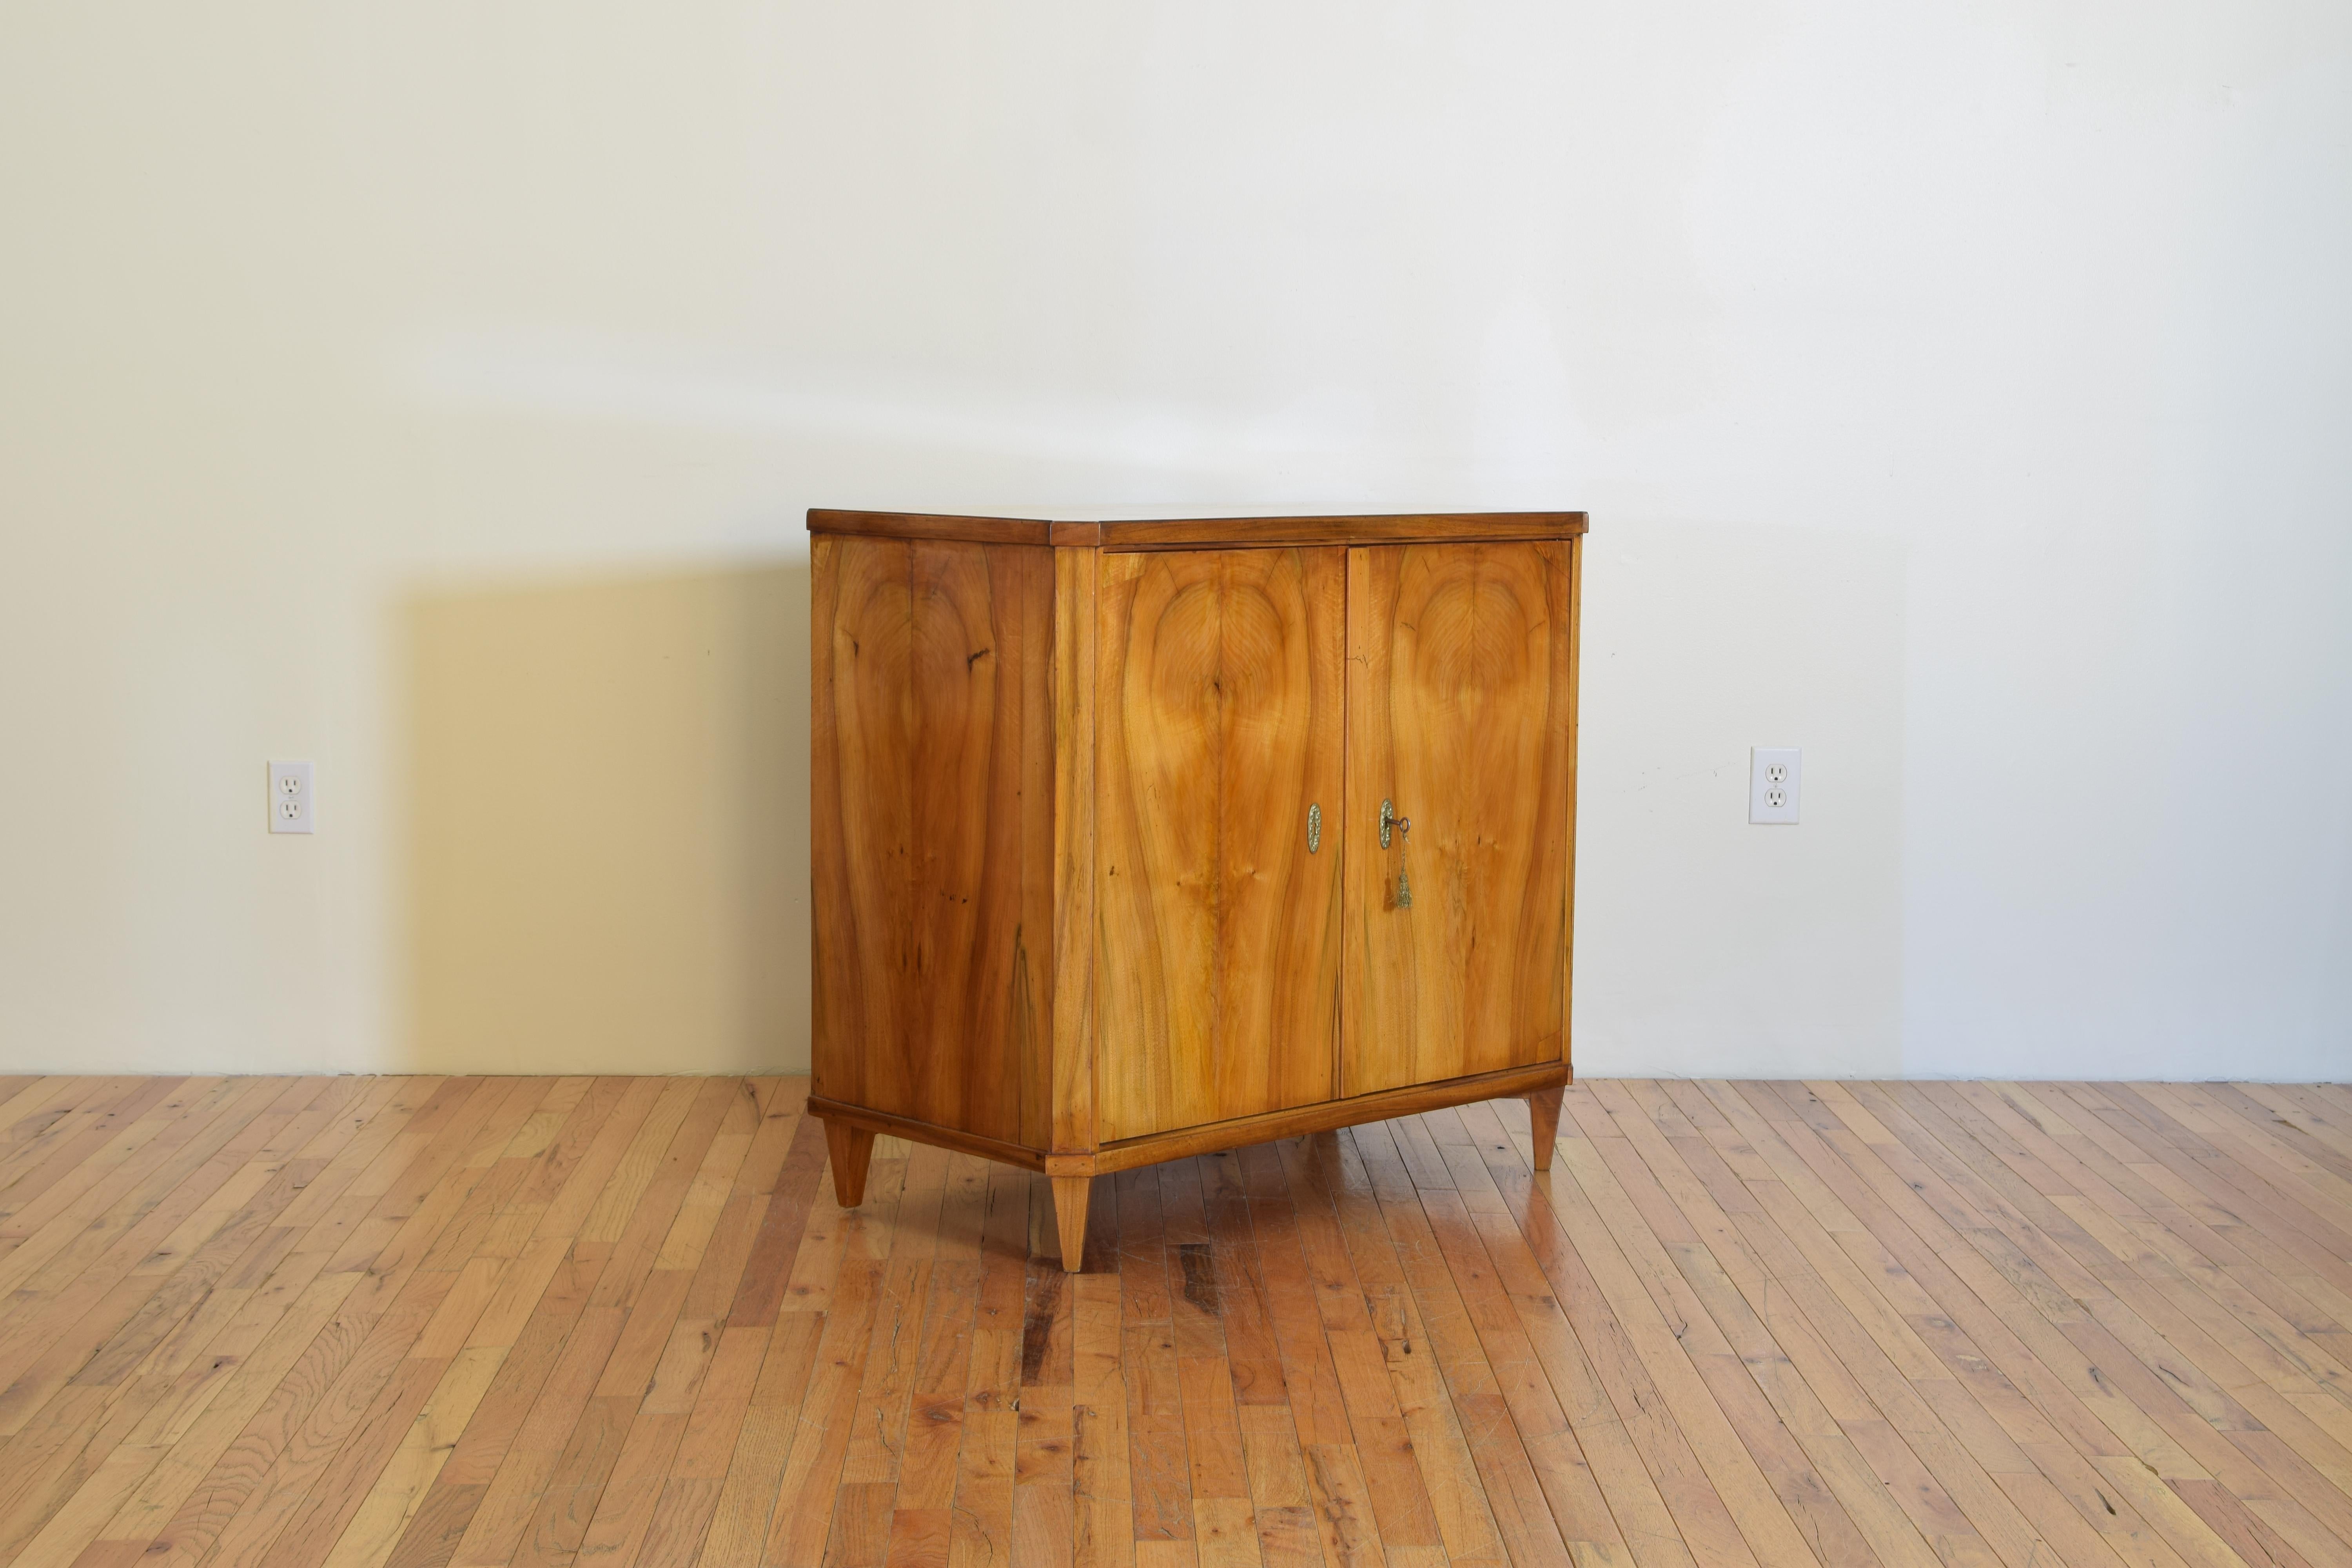 The rectangular top with front canted corners above a conforming case with matched grain veneers, the interior with adjustable shelf, raised on tapered legs.